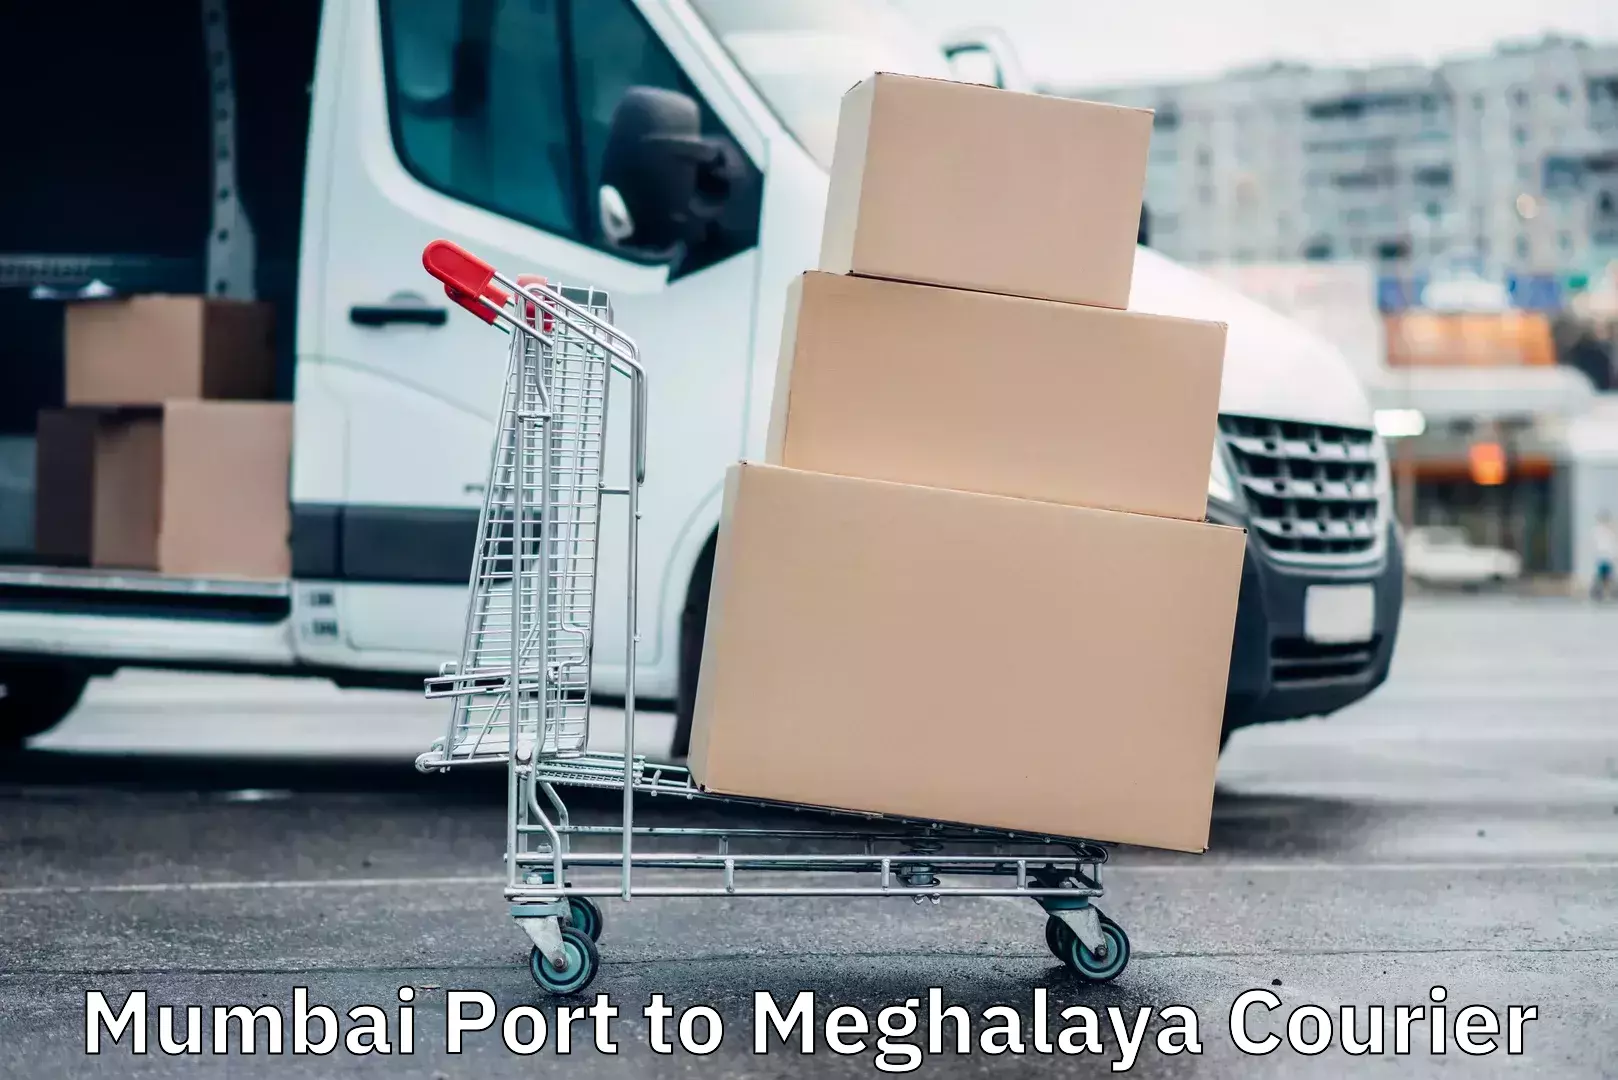 Urban courier service in Mumbai Port to Dkhiah West